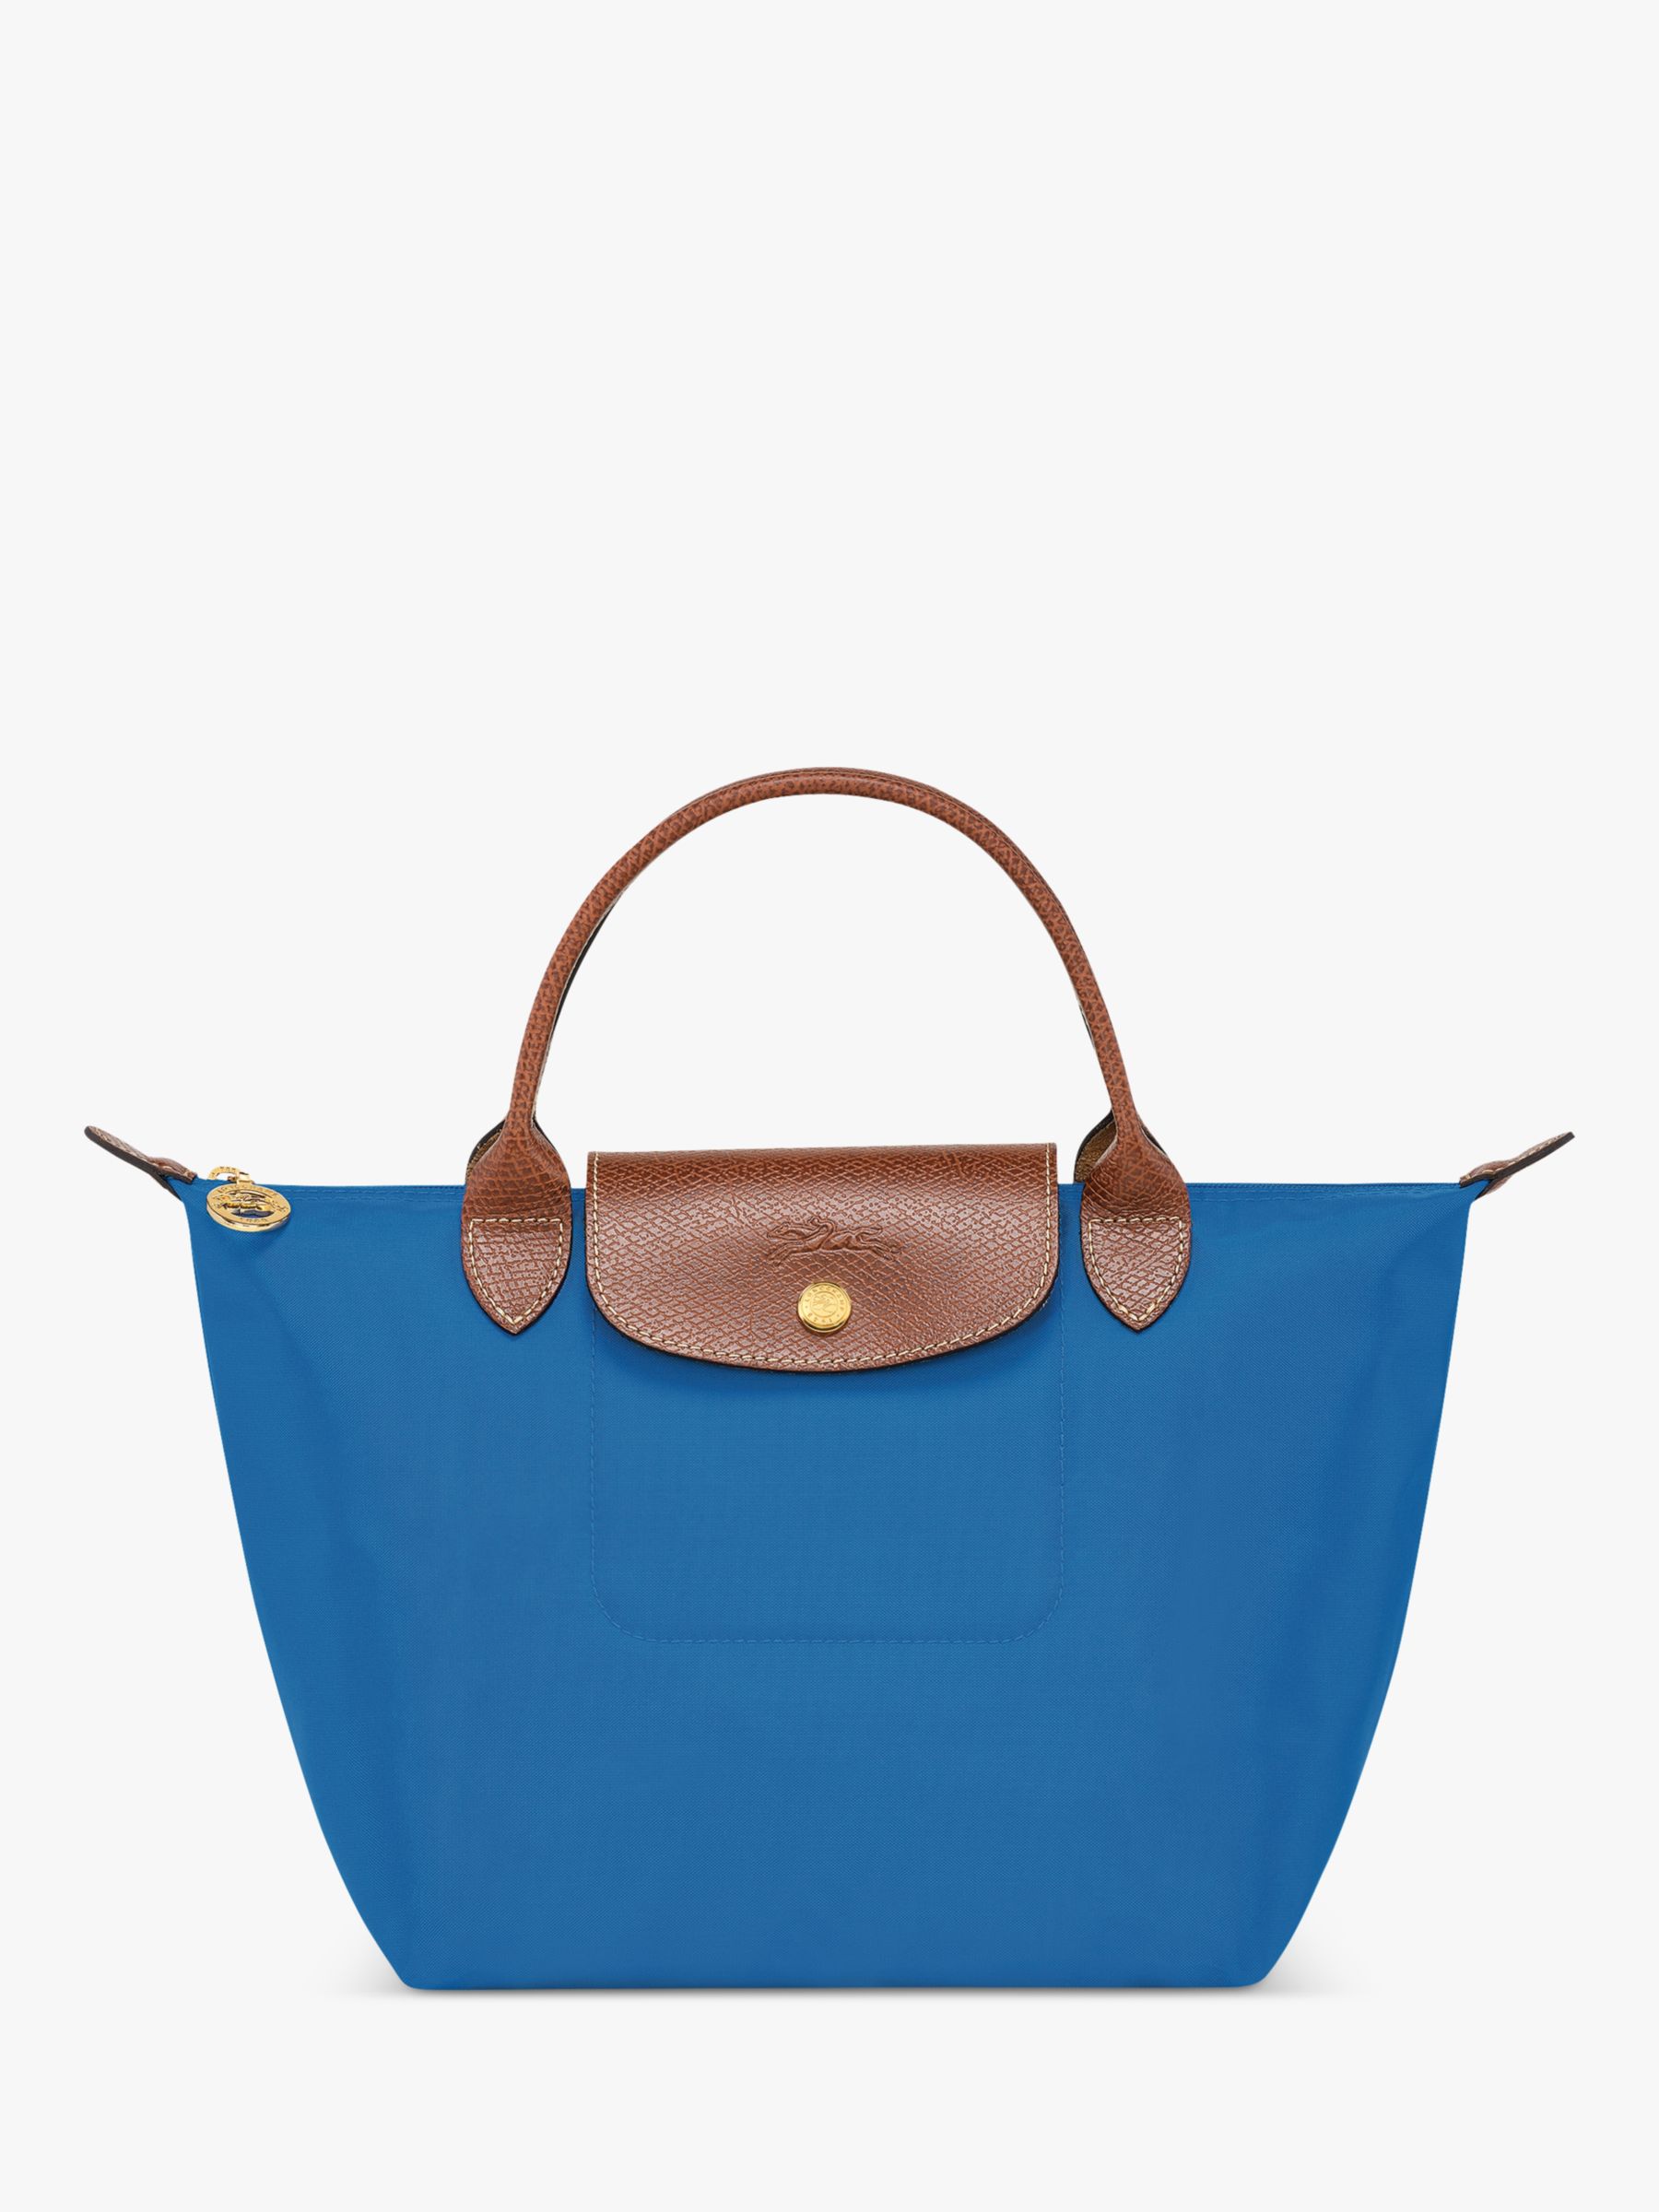 Handbags of the French brand Longchamp, multi-colored, in hands